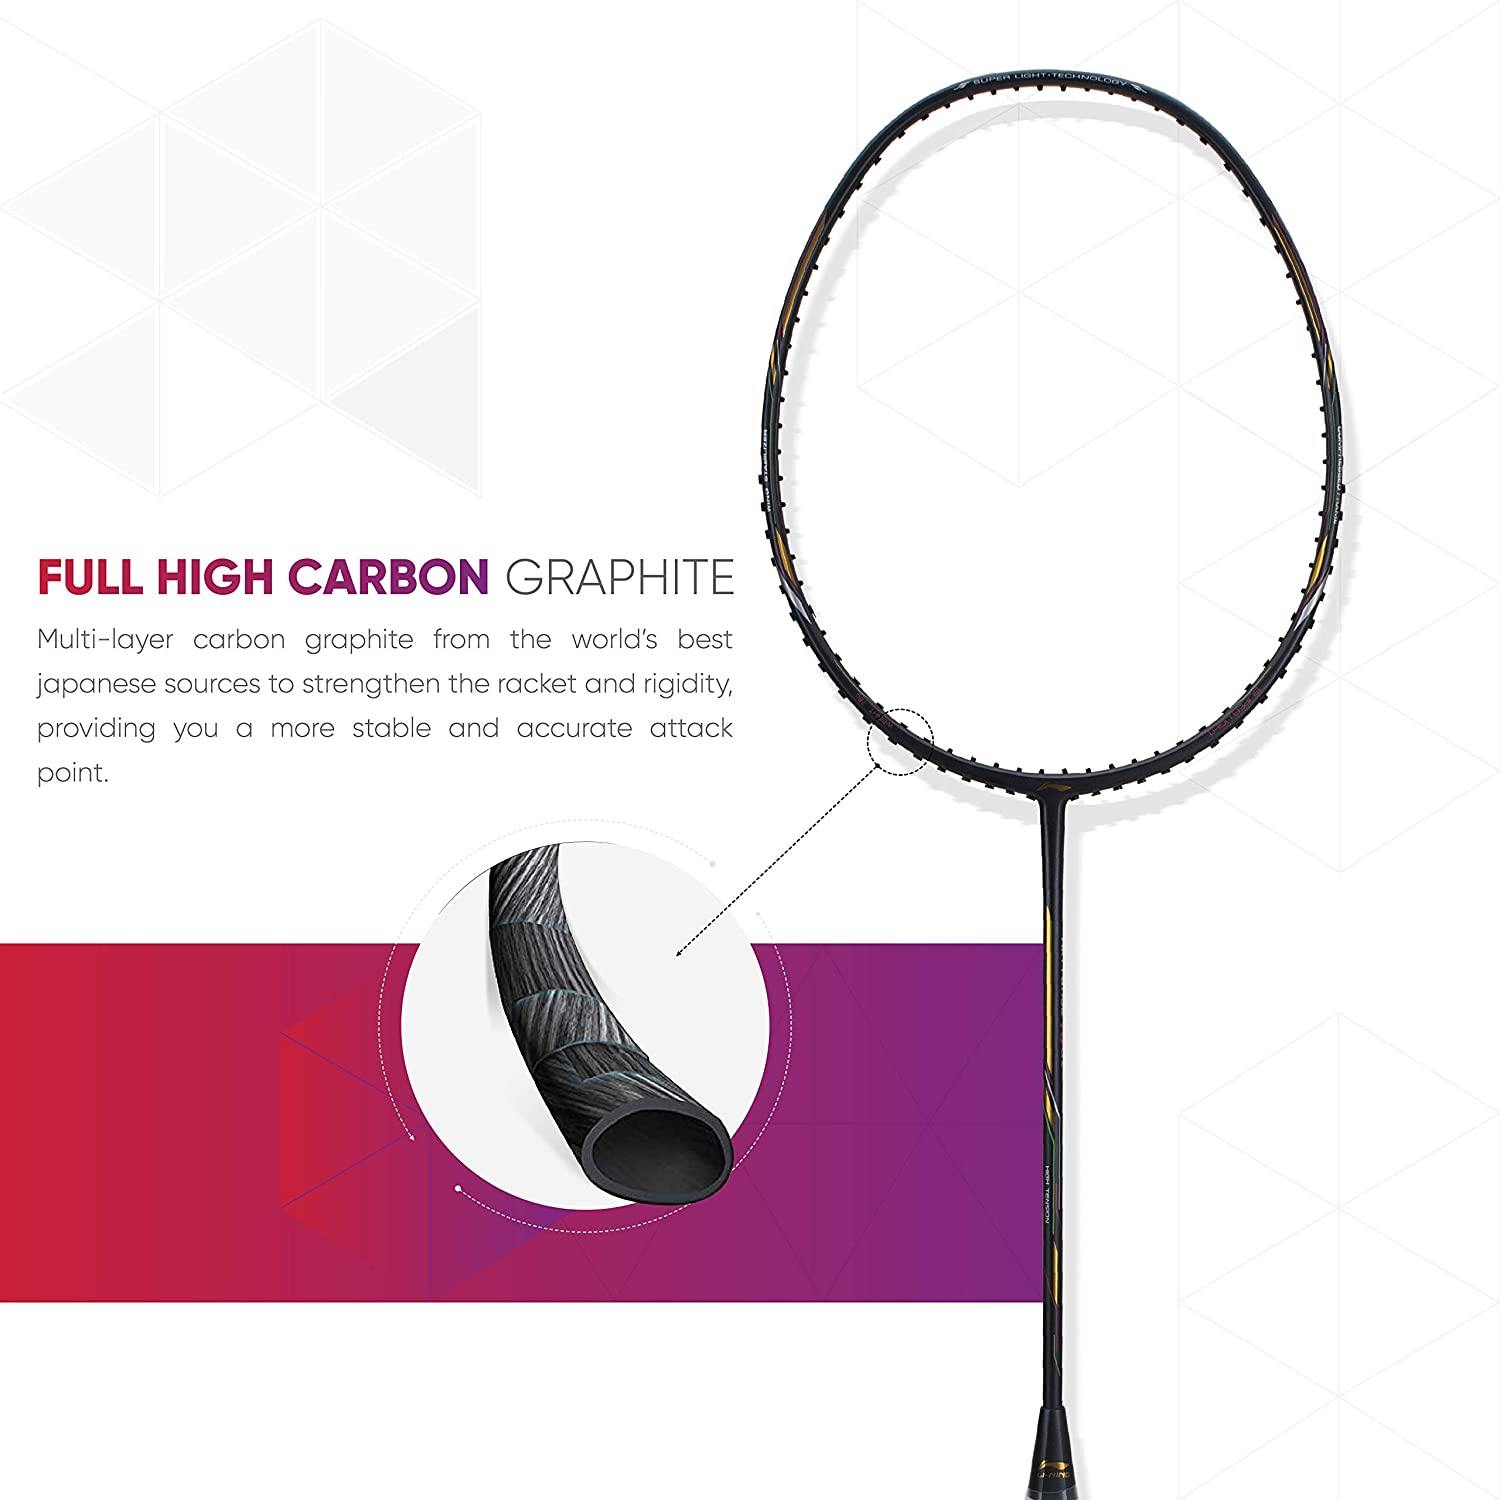 Li-Ning Air Force 78 G2 Carbon Fibre Badminton Racket with Free Full Cover Charcoal/Gold - Best Price online Prokicksports.com